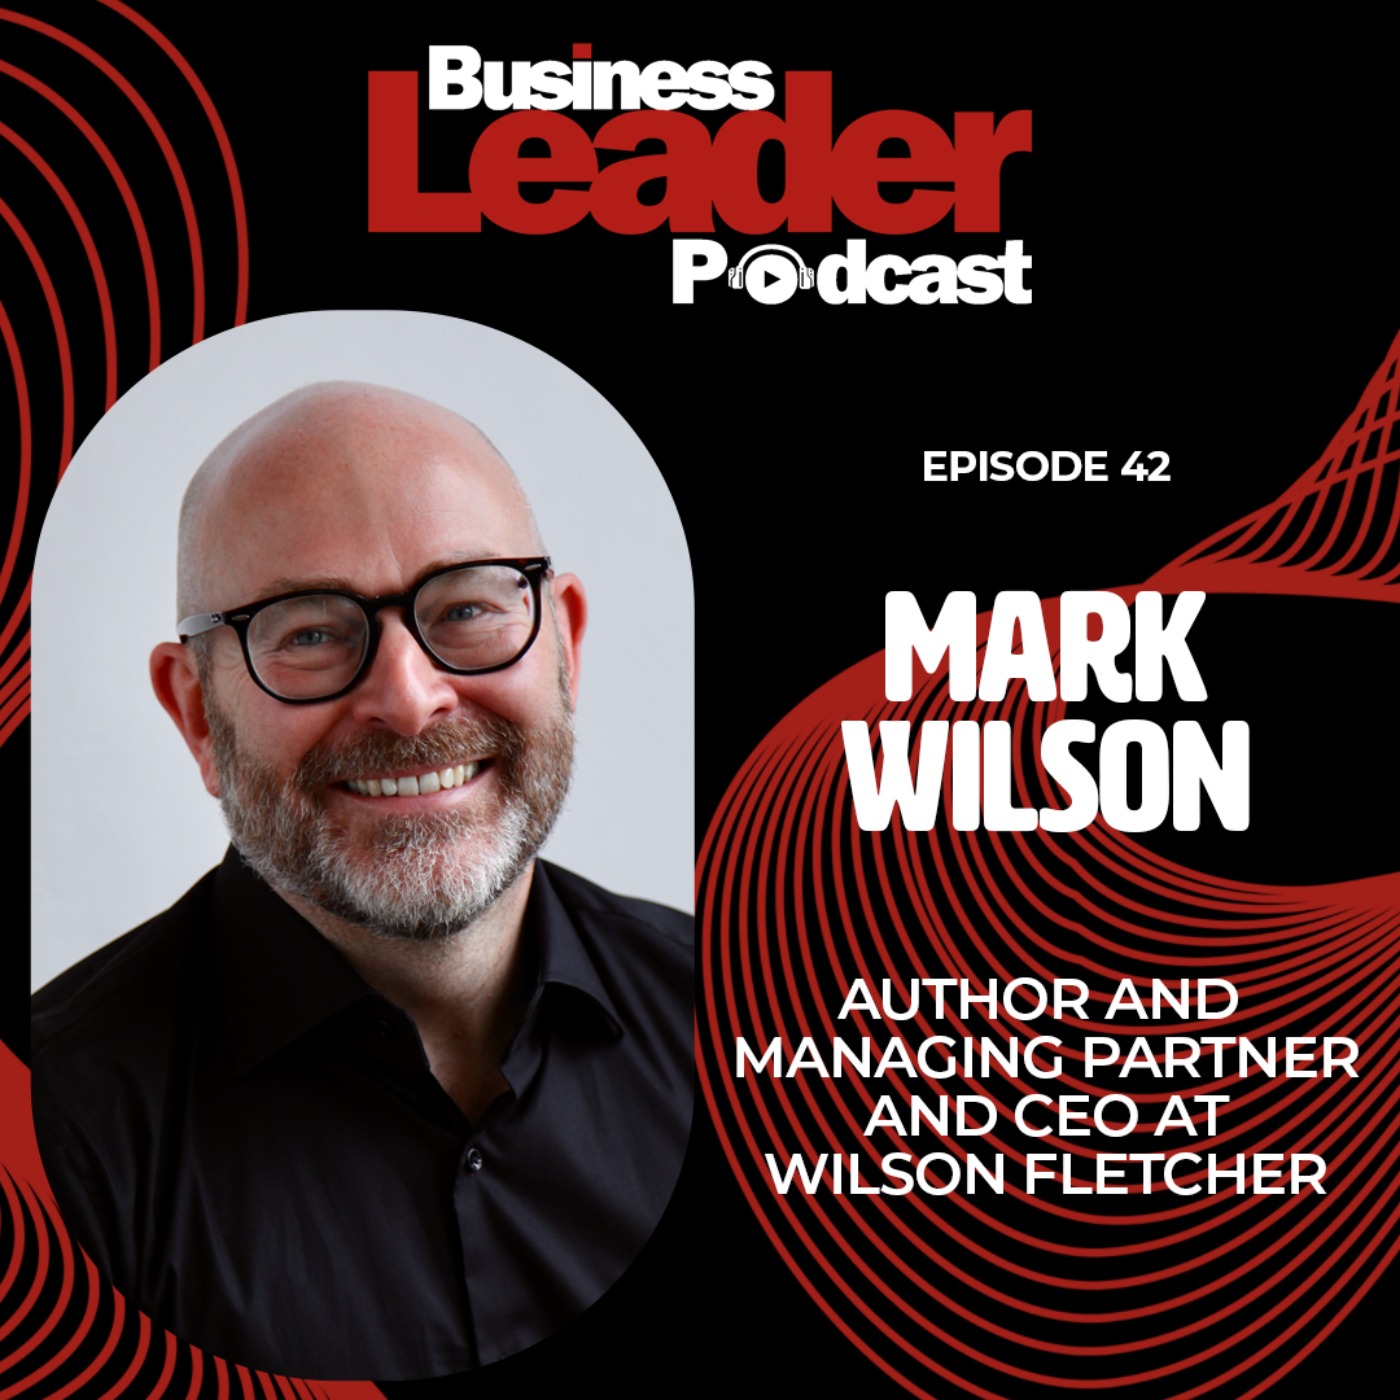 Mark Wilson: Preparing businesses for their future state